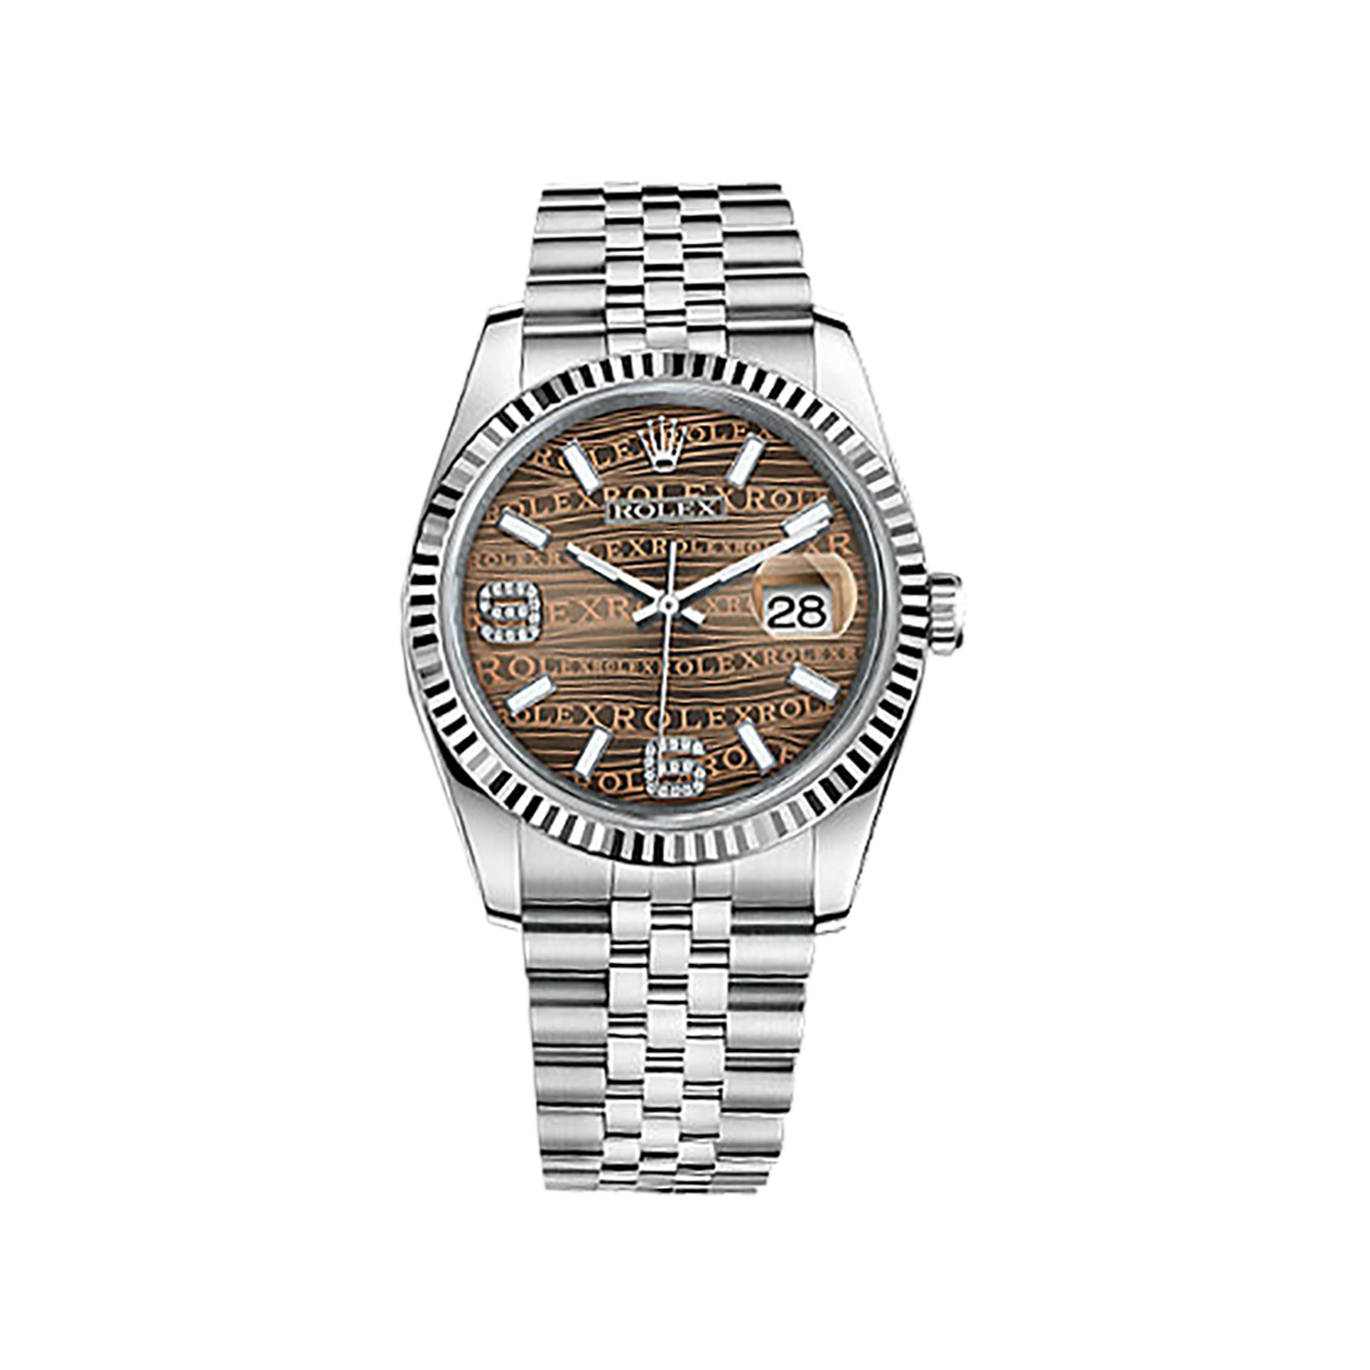 Datejust 36 116234 White Gold & Stainless Steel Watch (Bronze Waves Set with Diamonds)